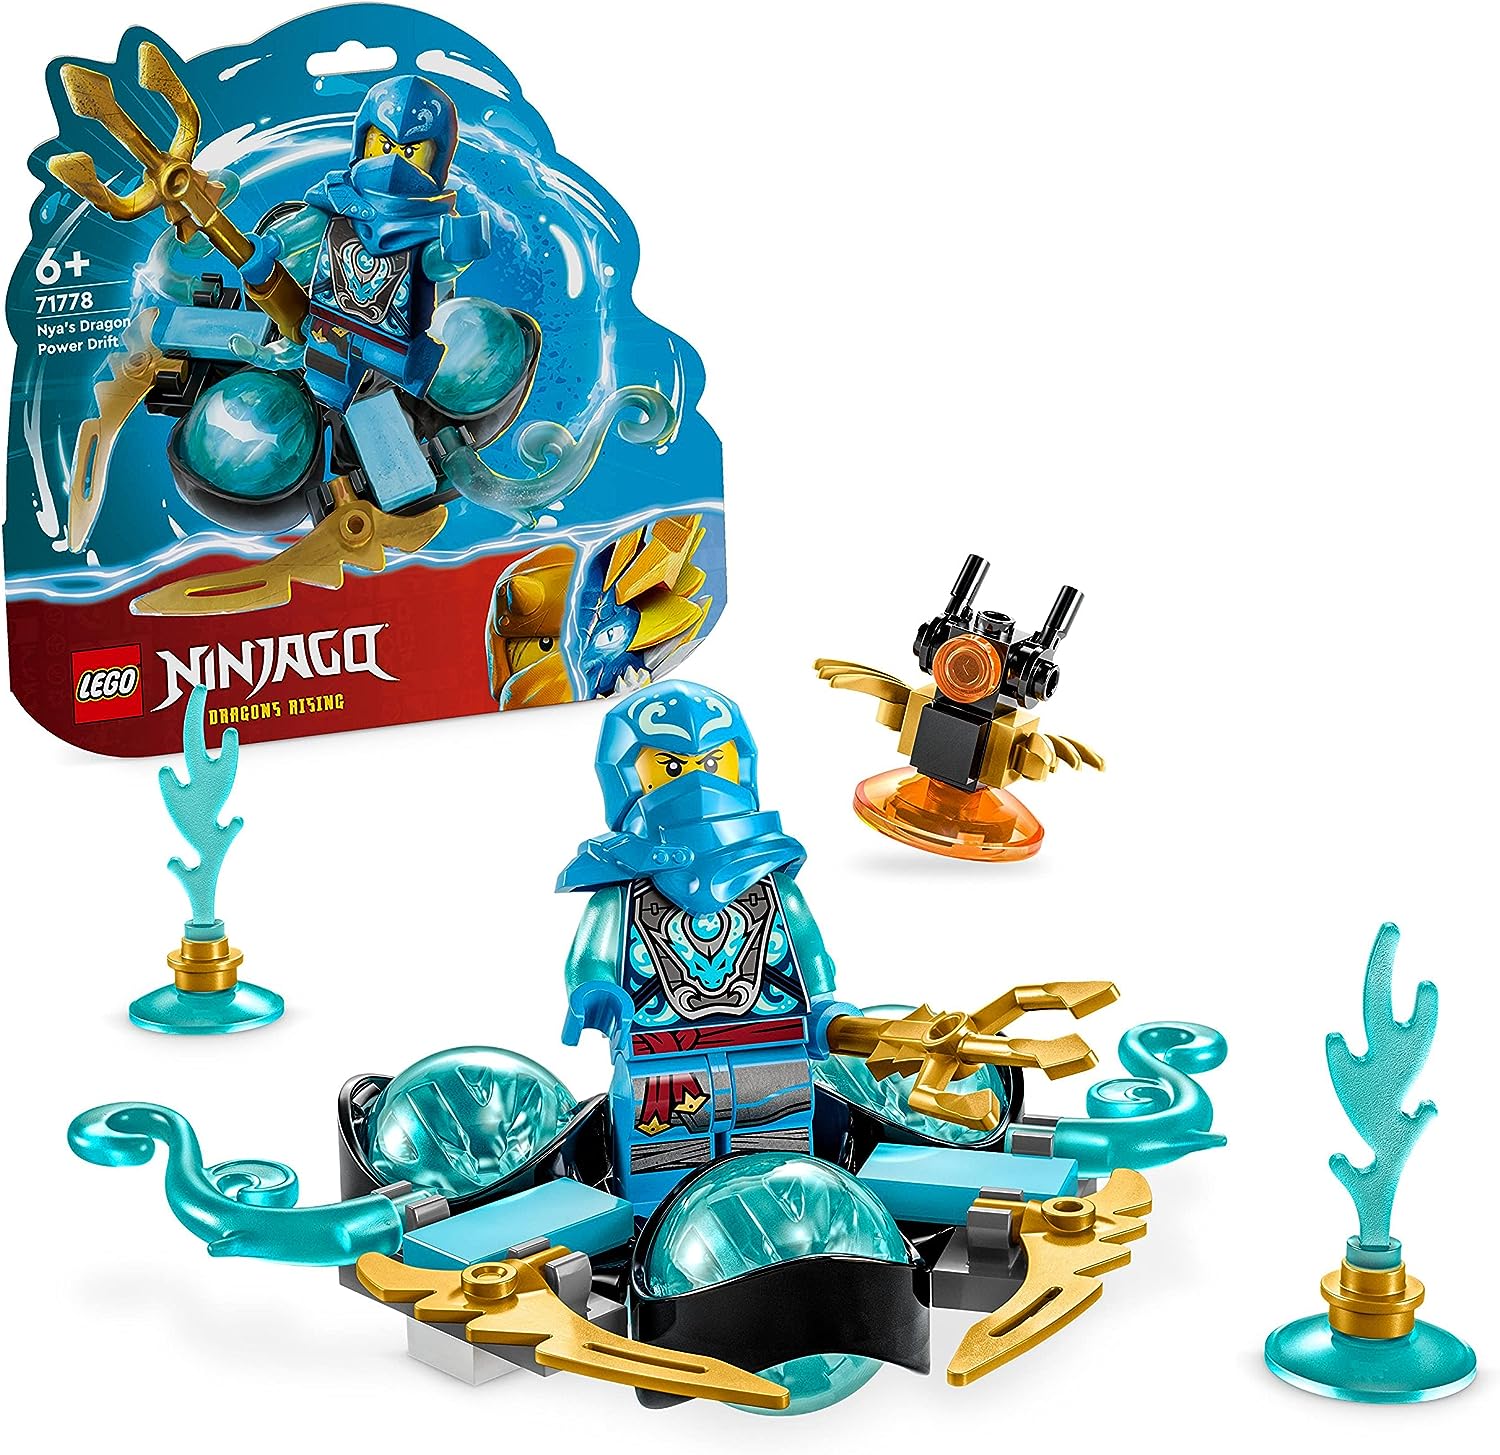 LEGO 71778 Ninjago Nyas Dragon Power Spinjitzu Drift Toy, Spinner with Art Pieces, NYA Mini Figure for Collecting, Small Gift for Children from 6 Years